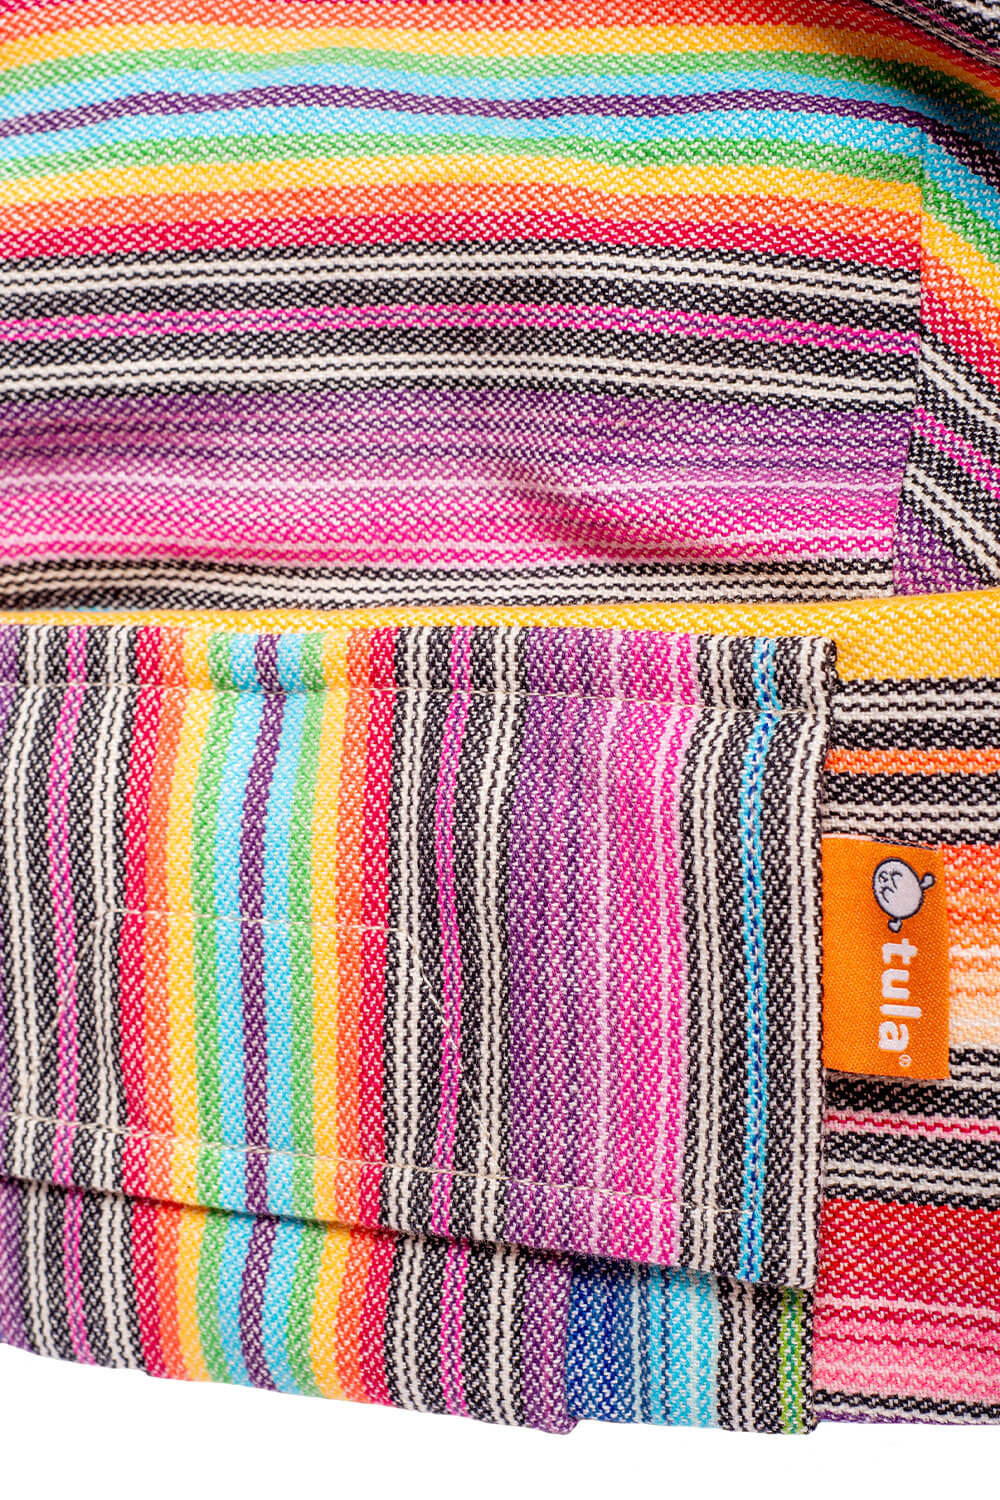 Rainbow Falls - Signature Handwoven Free-to-Grow Baby Carrier